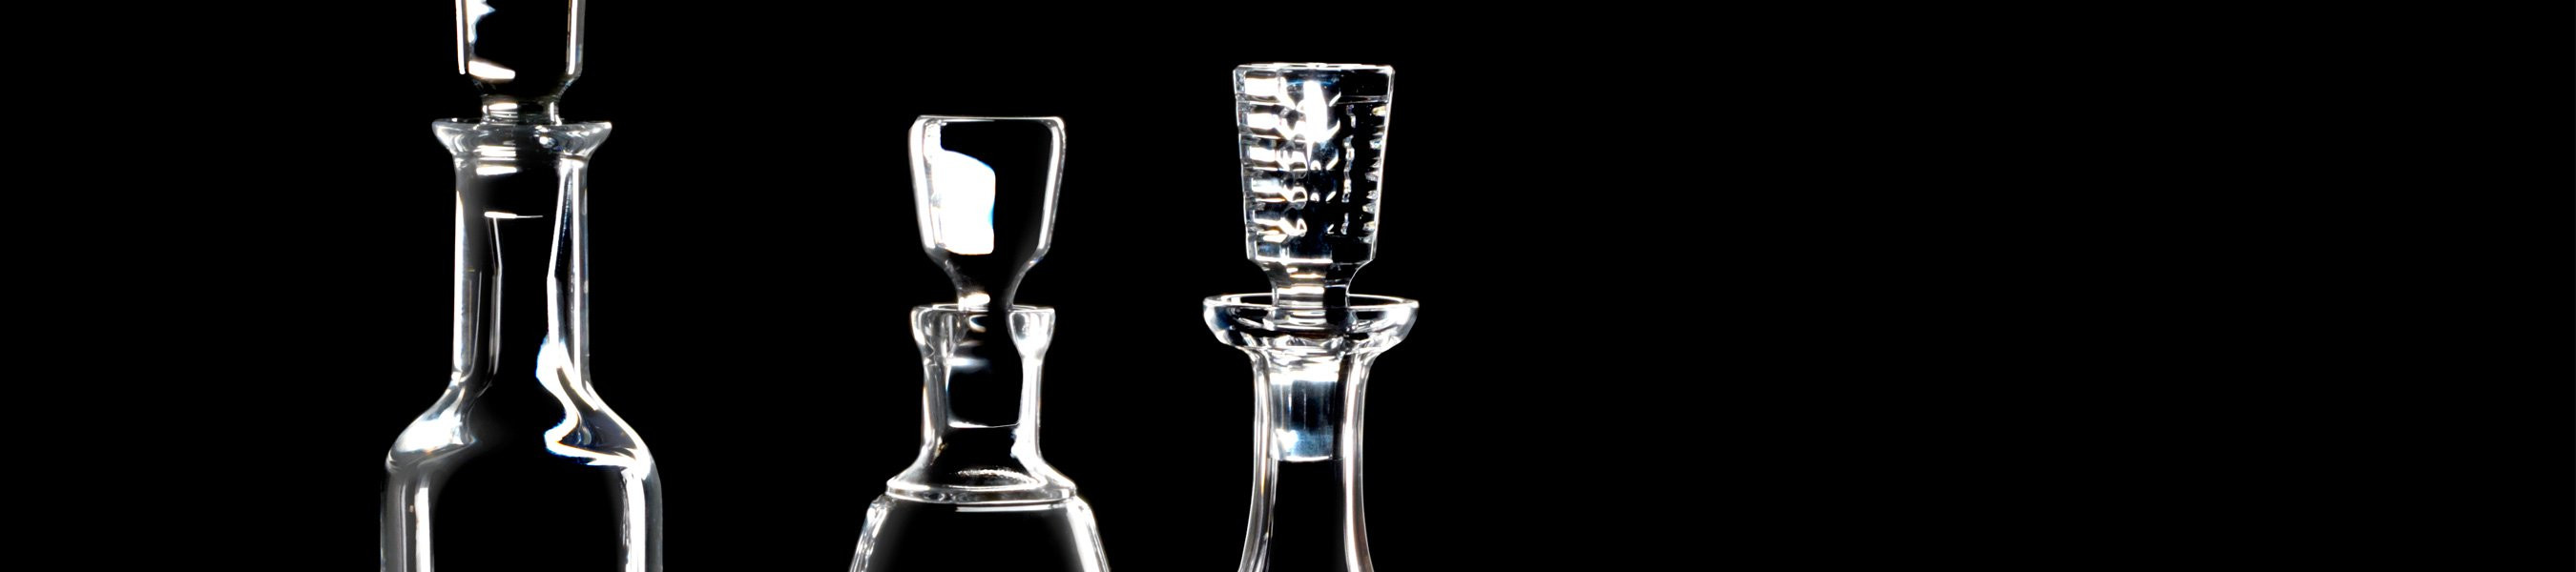 26 Lovable Marquis by Waterford Sheridan Flared 11 Inch Vase 2024 free download marquis by waterford sheridan flared 11 inch vase of crystal decanters pitchers carafes waterforda us throughout waterford crystal decanters pitchers carafes